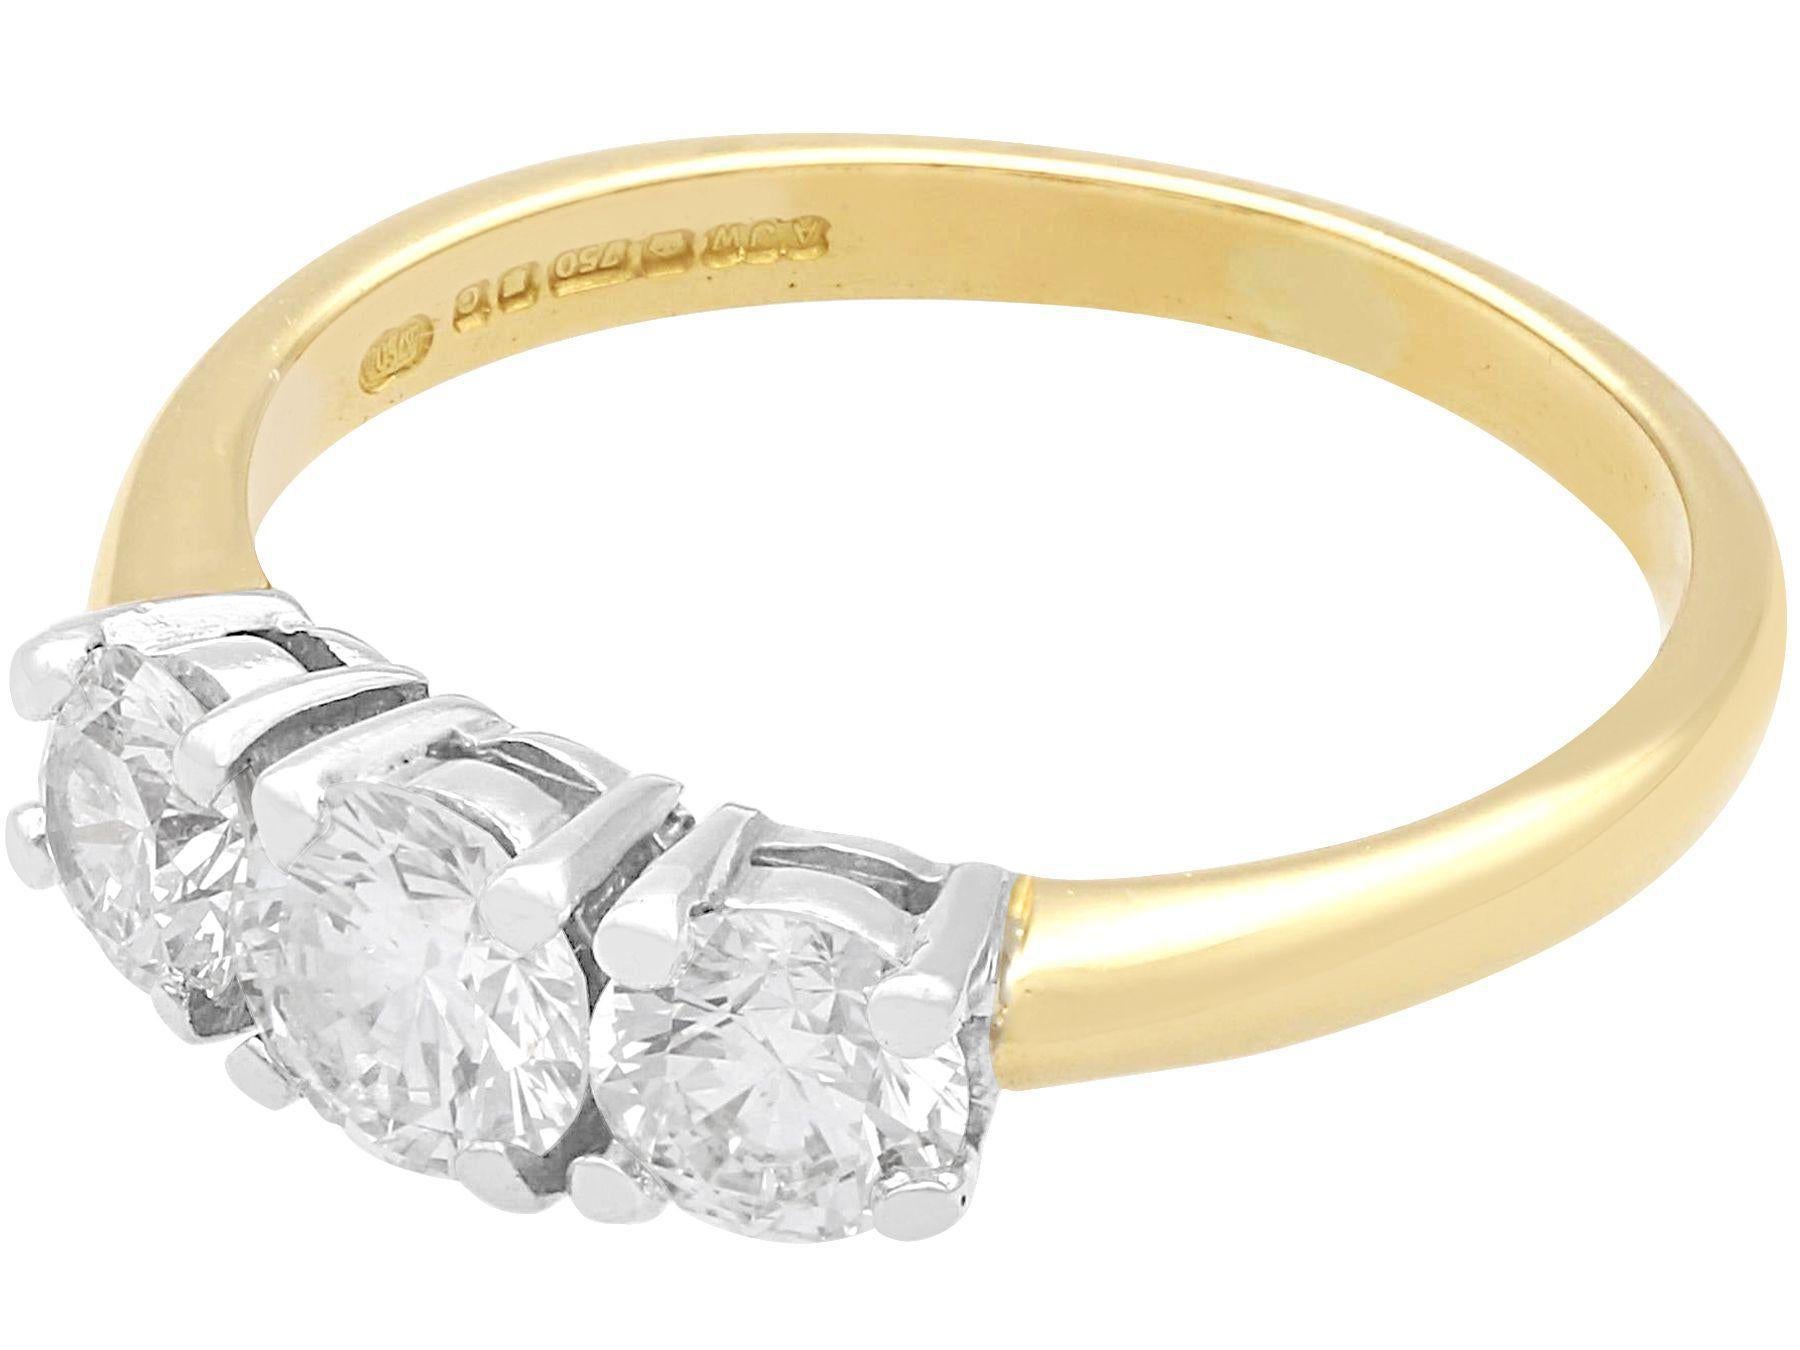 Round Cut 1.30 Carat Diamond and 18k Yellow Gold Trilogy Ring For Sale